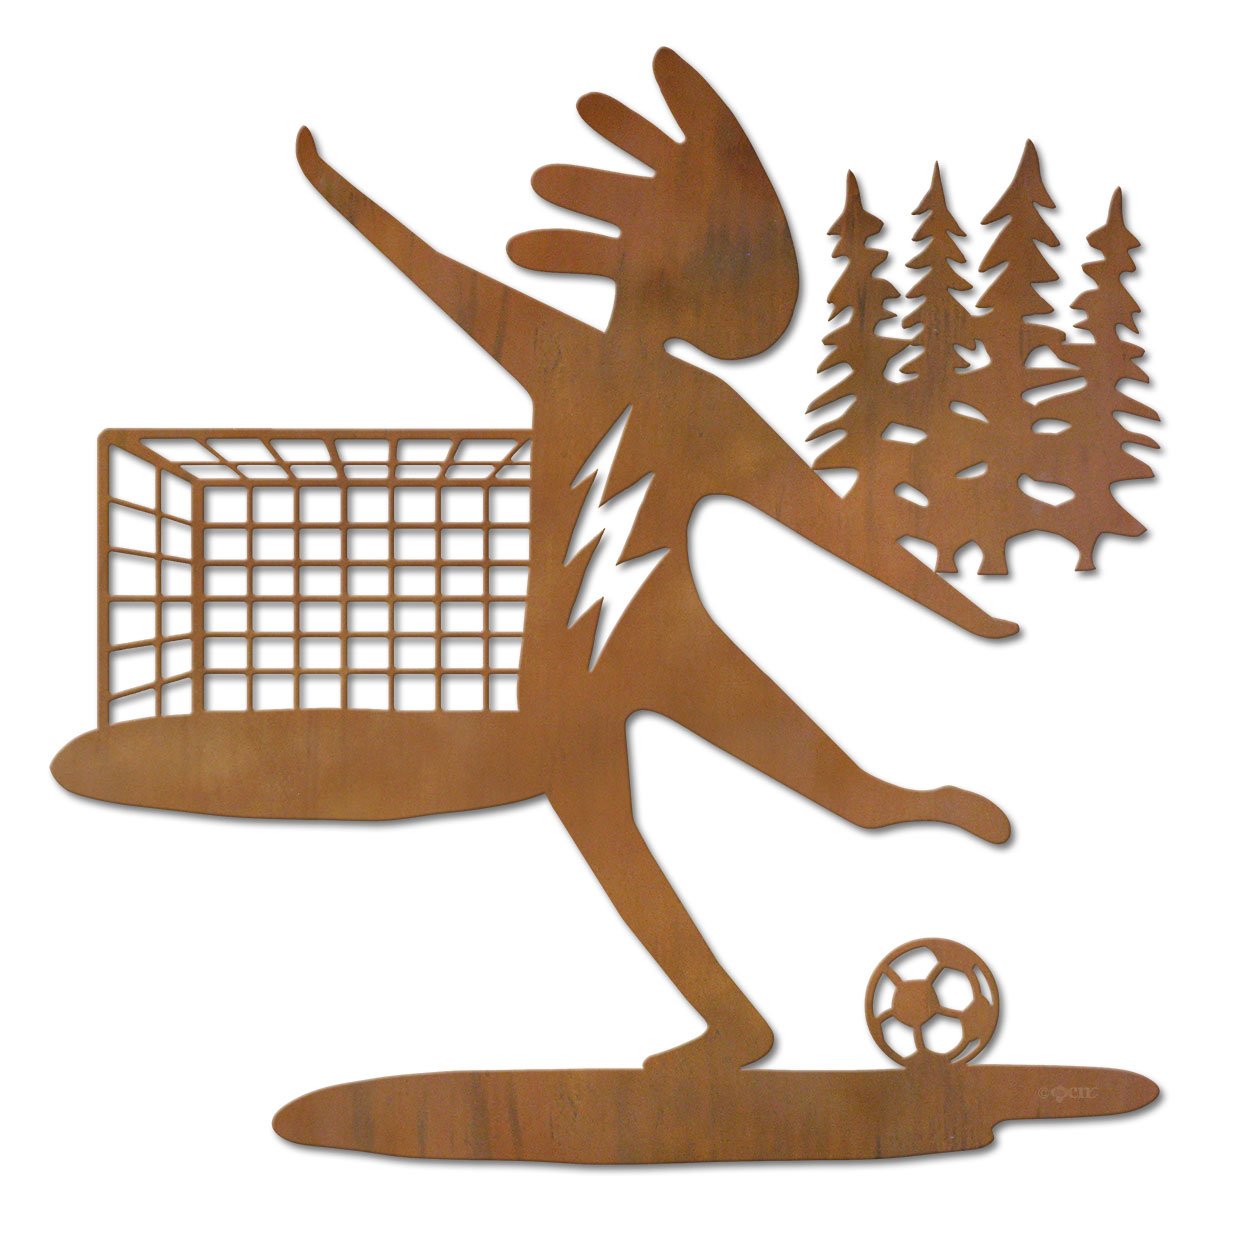 602032 - 44in Vertical Kokopelli Soccer and Trees XL Rustic Metal Wall Decor